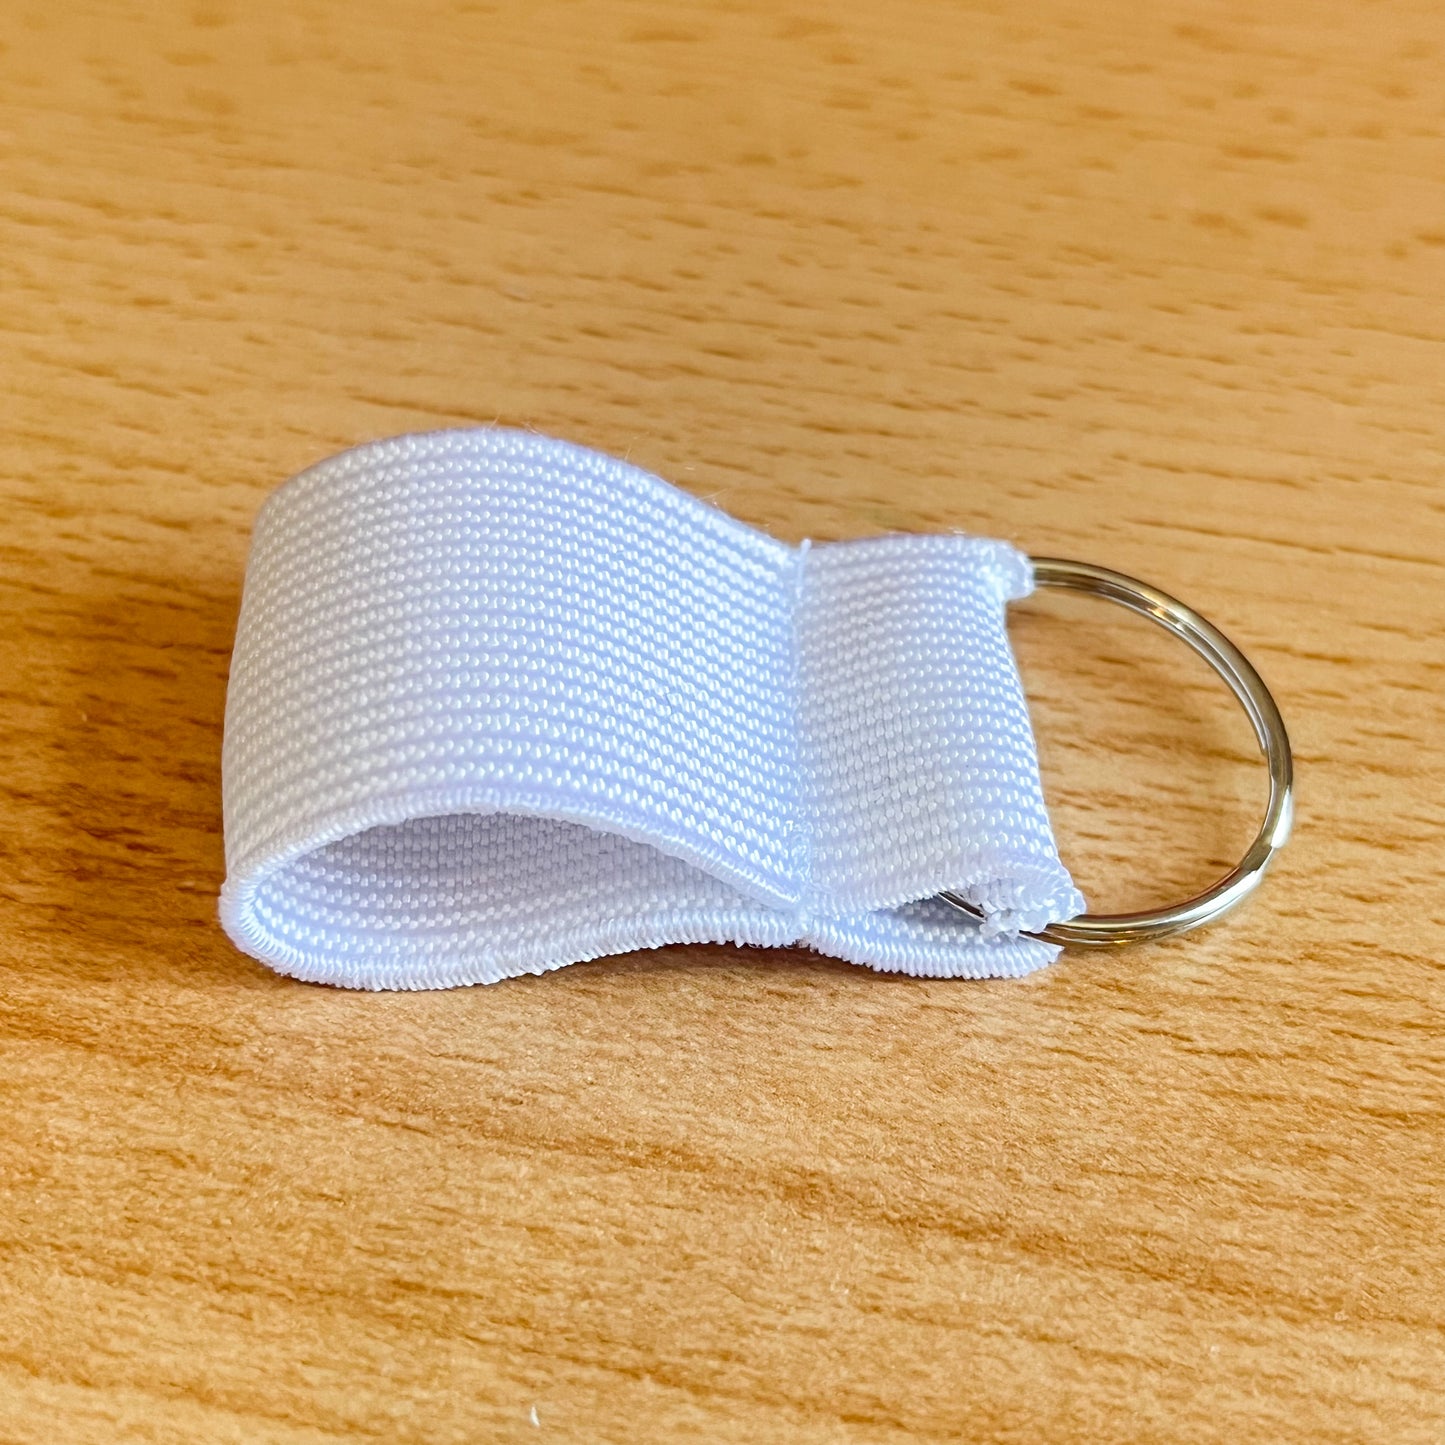 White Elastic Strap Attachment for Walking Aids